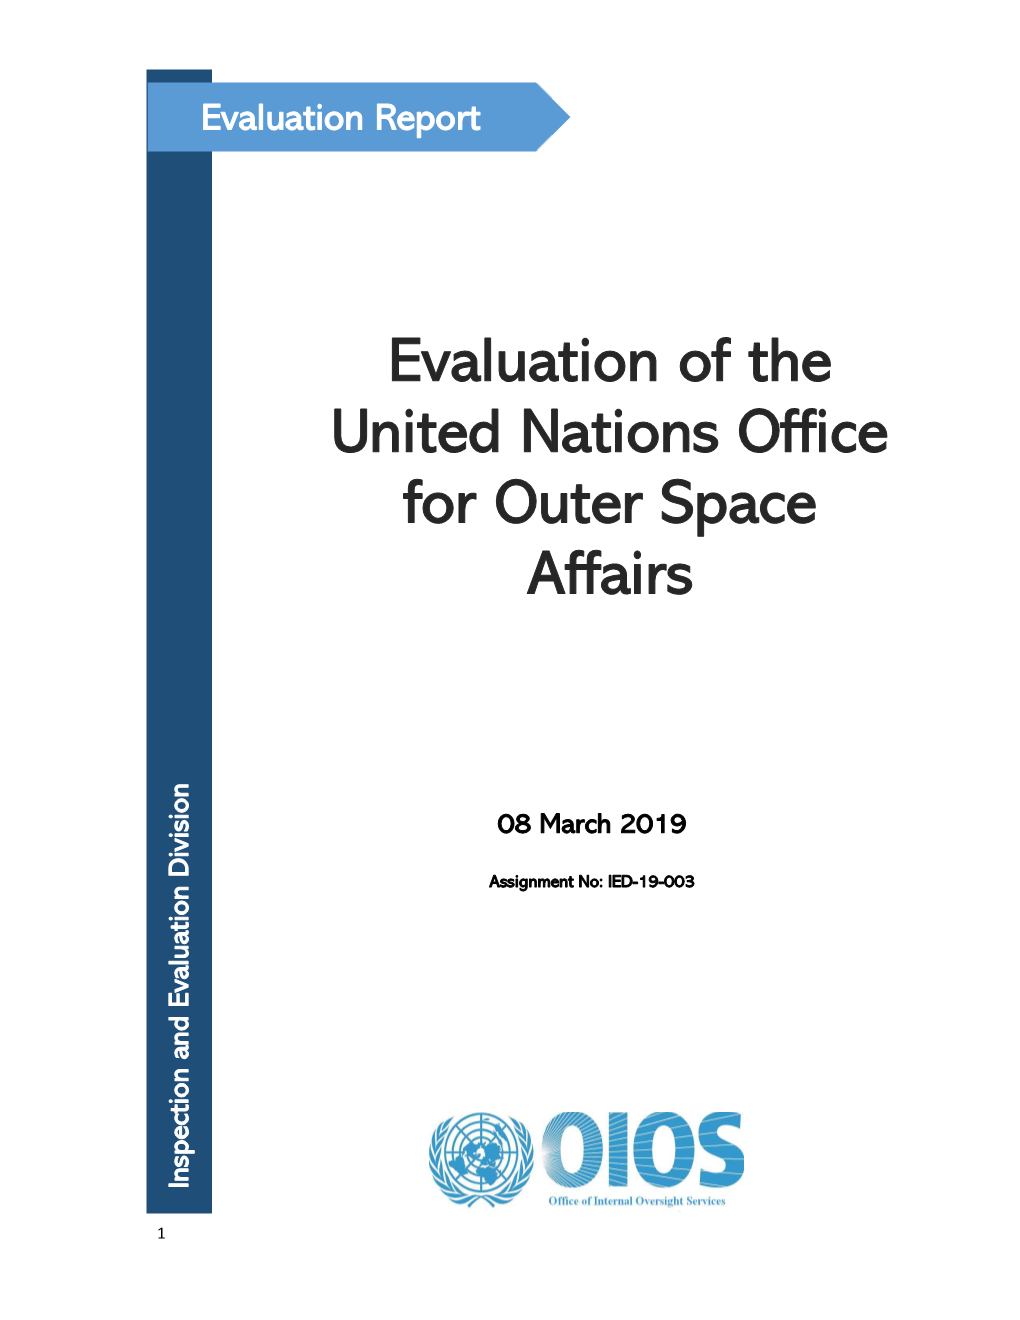 Evaluation of the United Nations Office for Outer Space Affairs